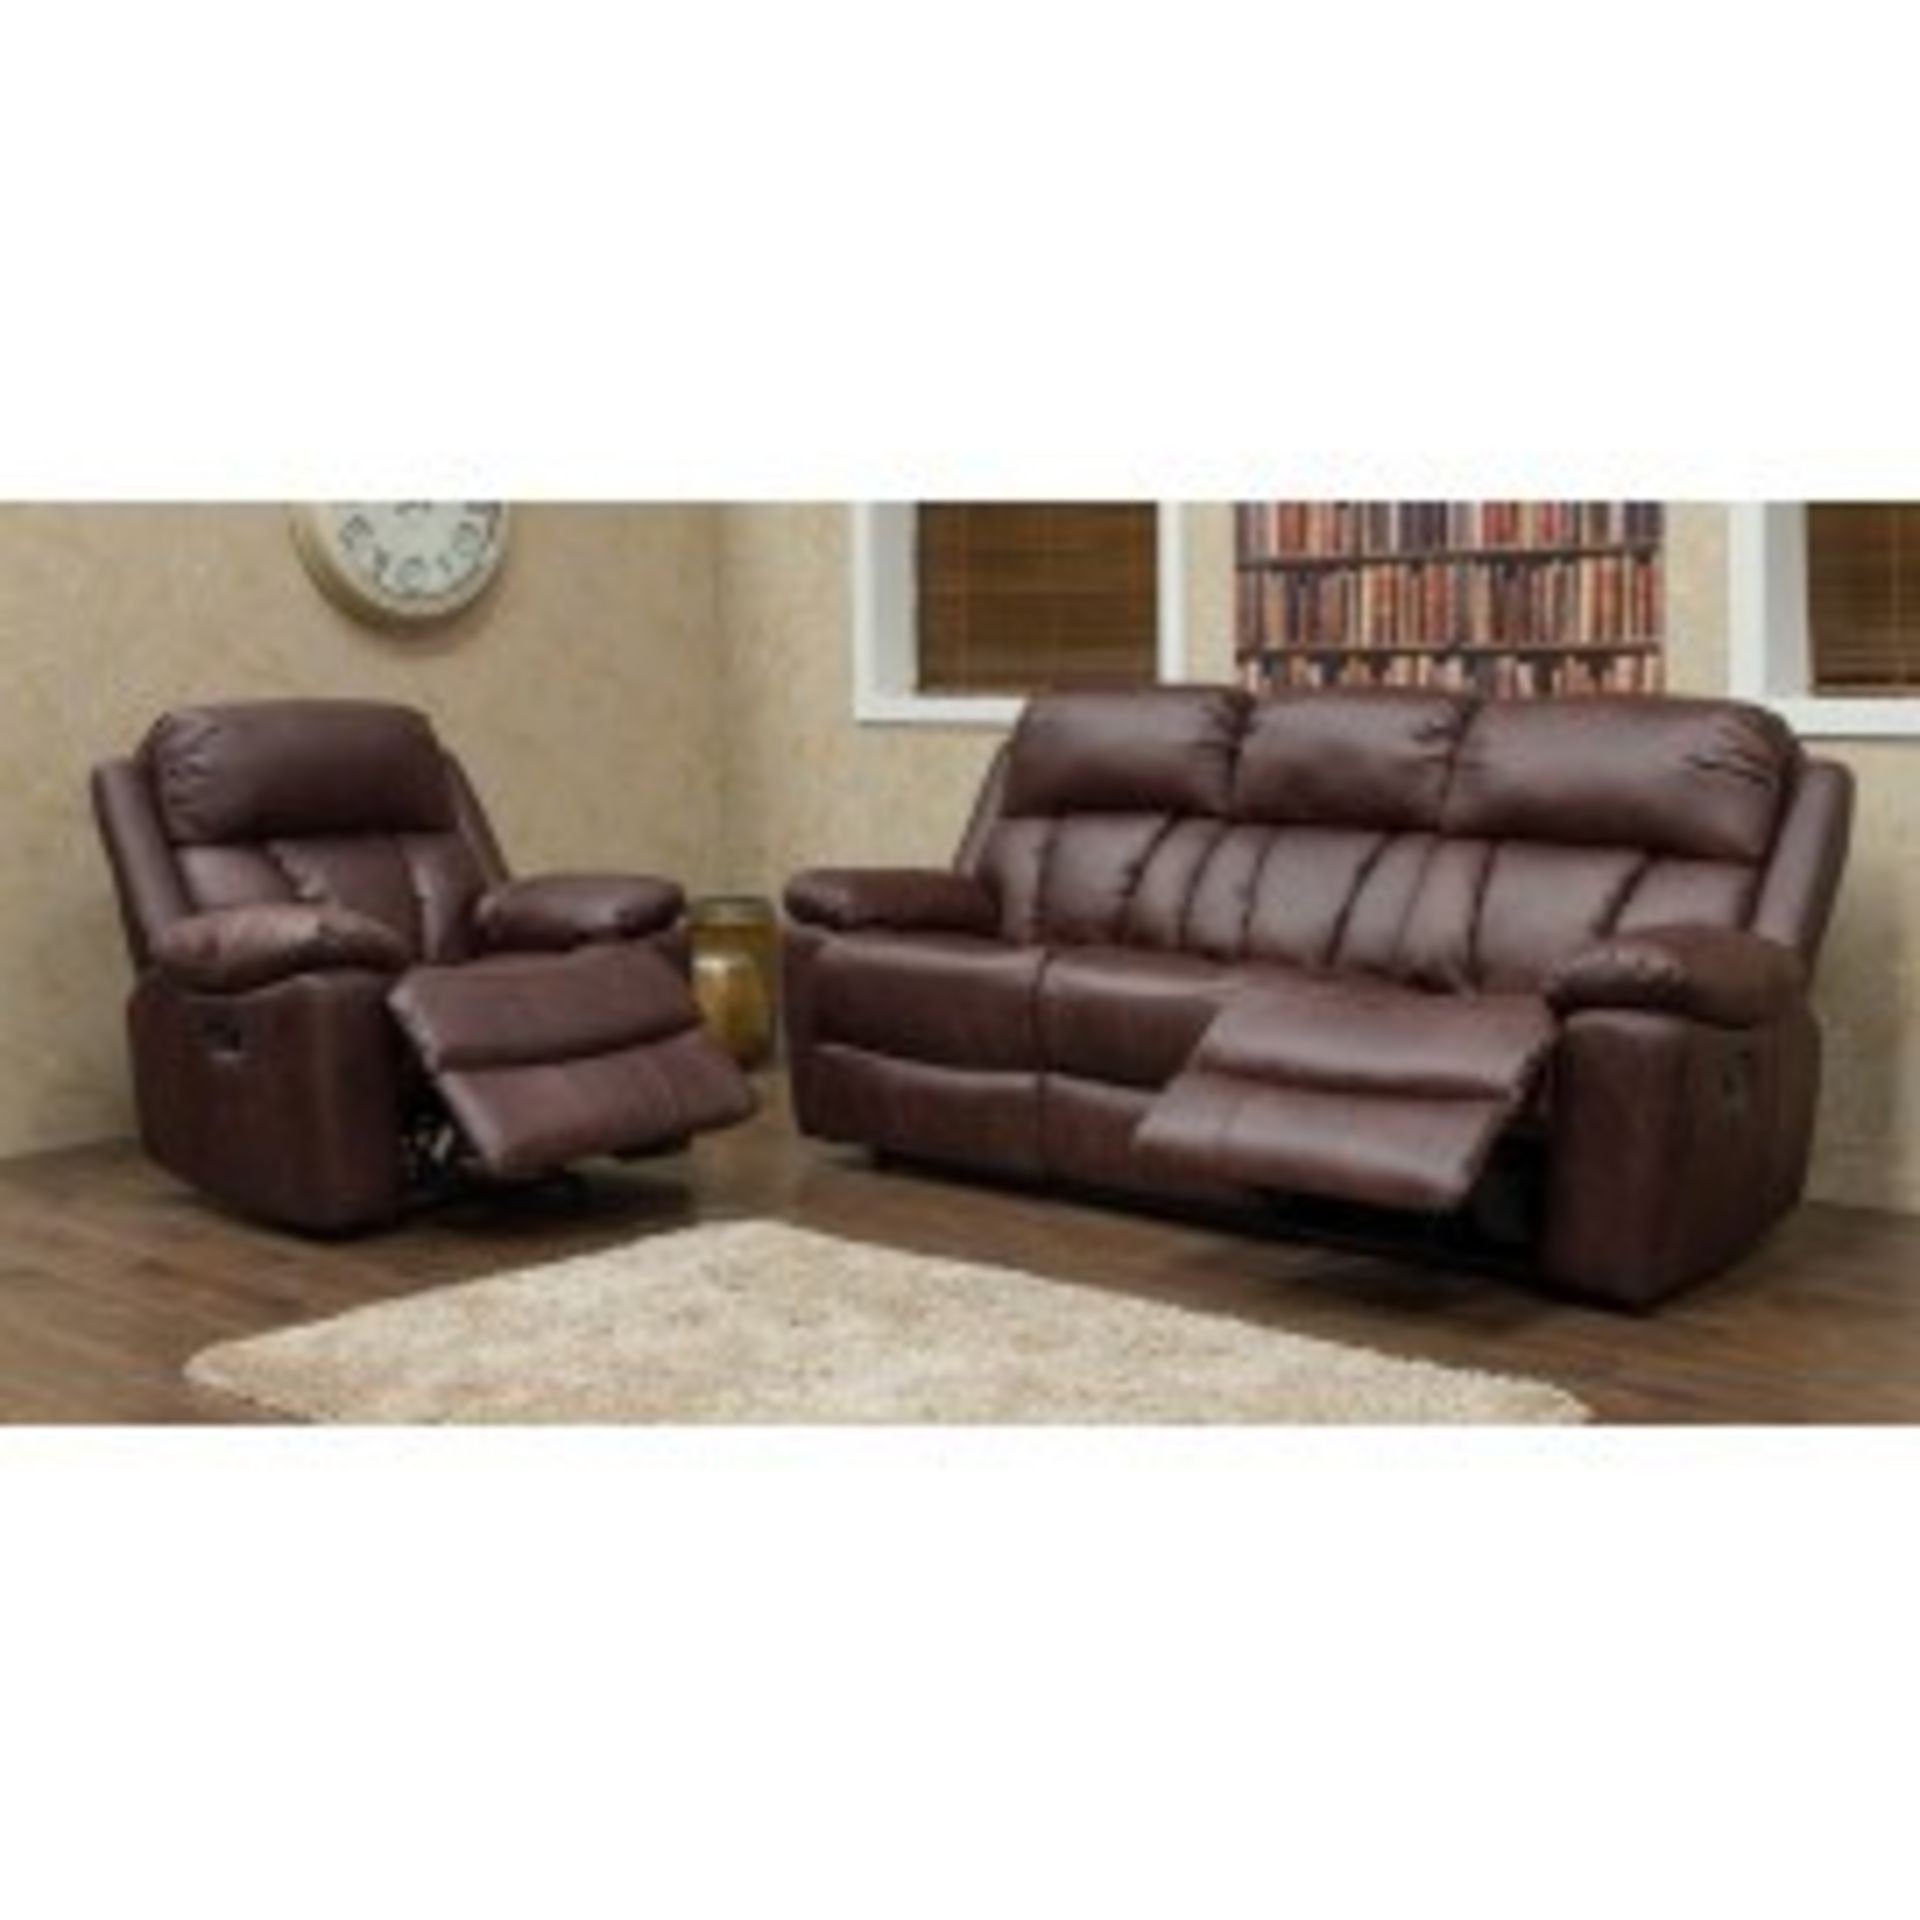 Brand New Boxed Benson 3 Seater Chestnut Leatheraire Reclining Sofa Plus 2 Matching Arm Chairs - Image 2 of 2